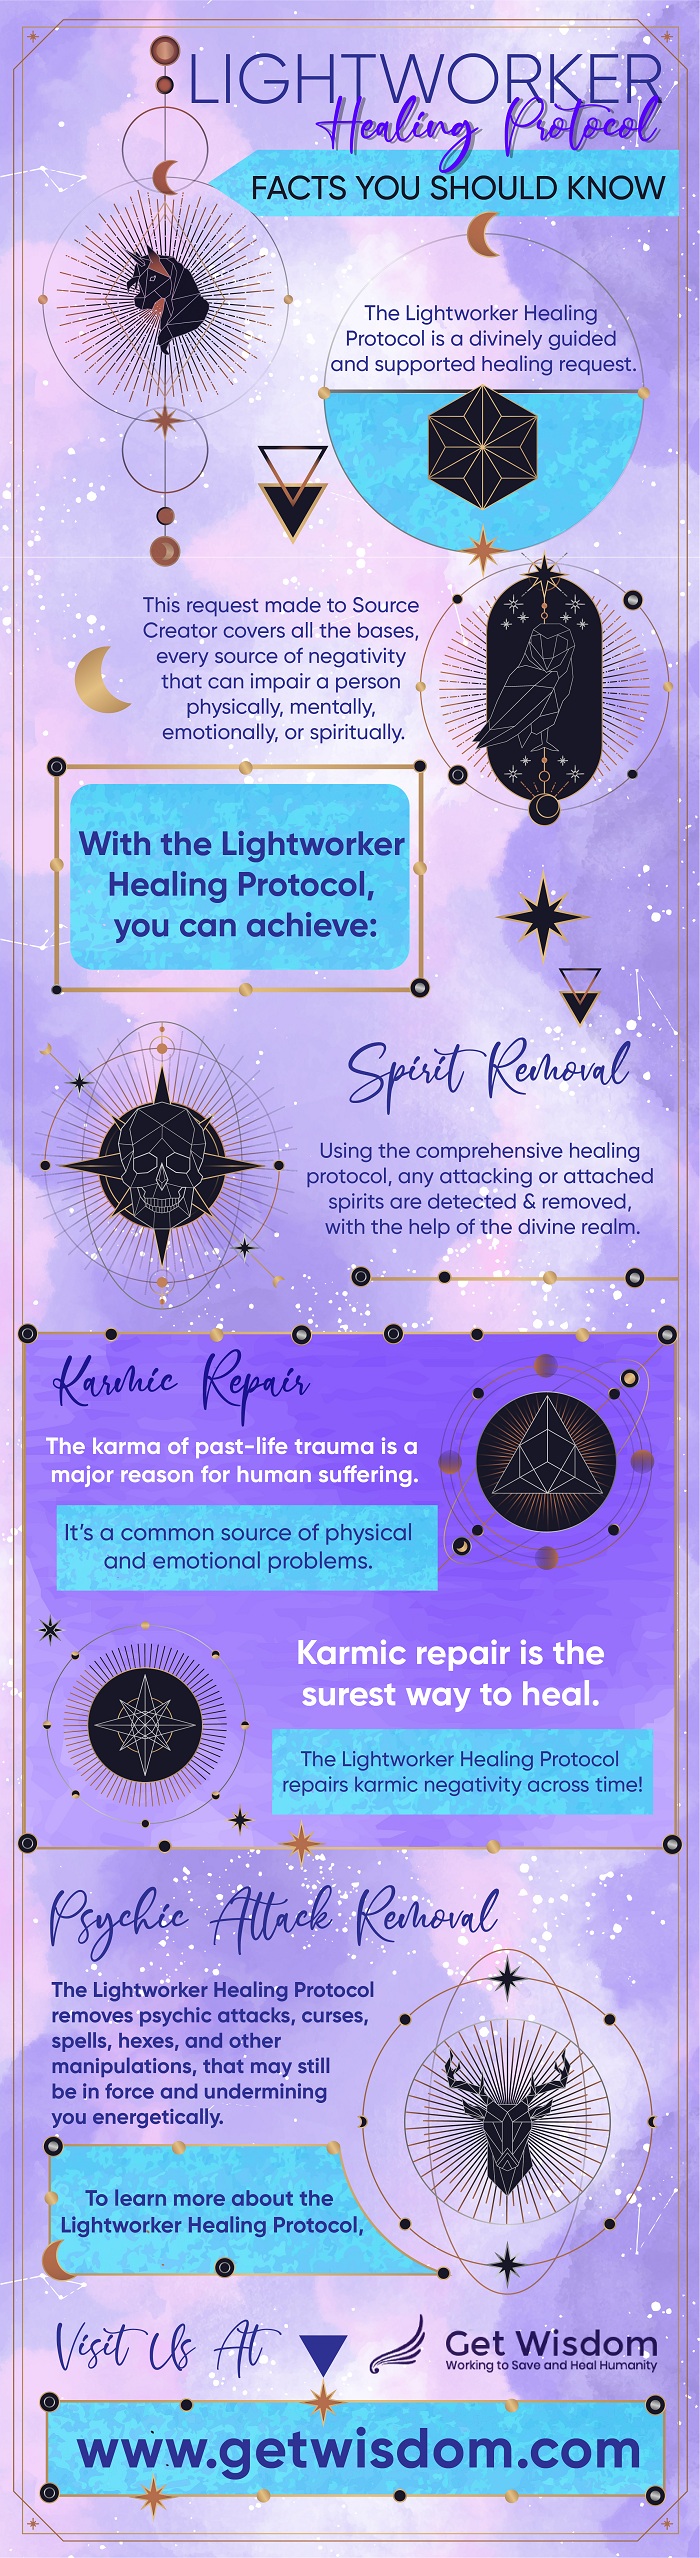 Lighworker Healing Protocol: Facts You Should Know 